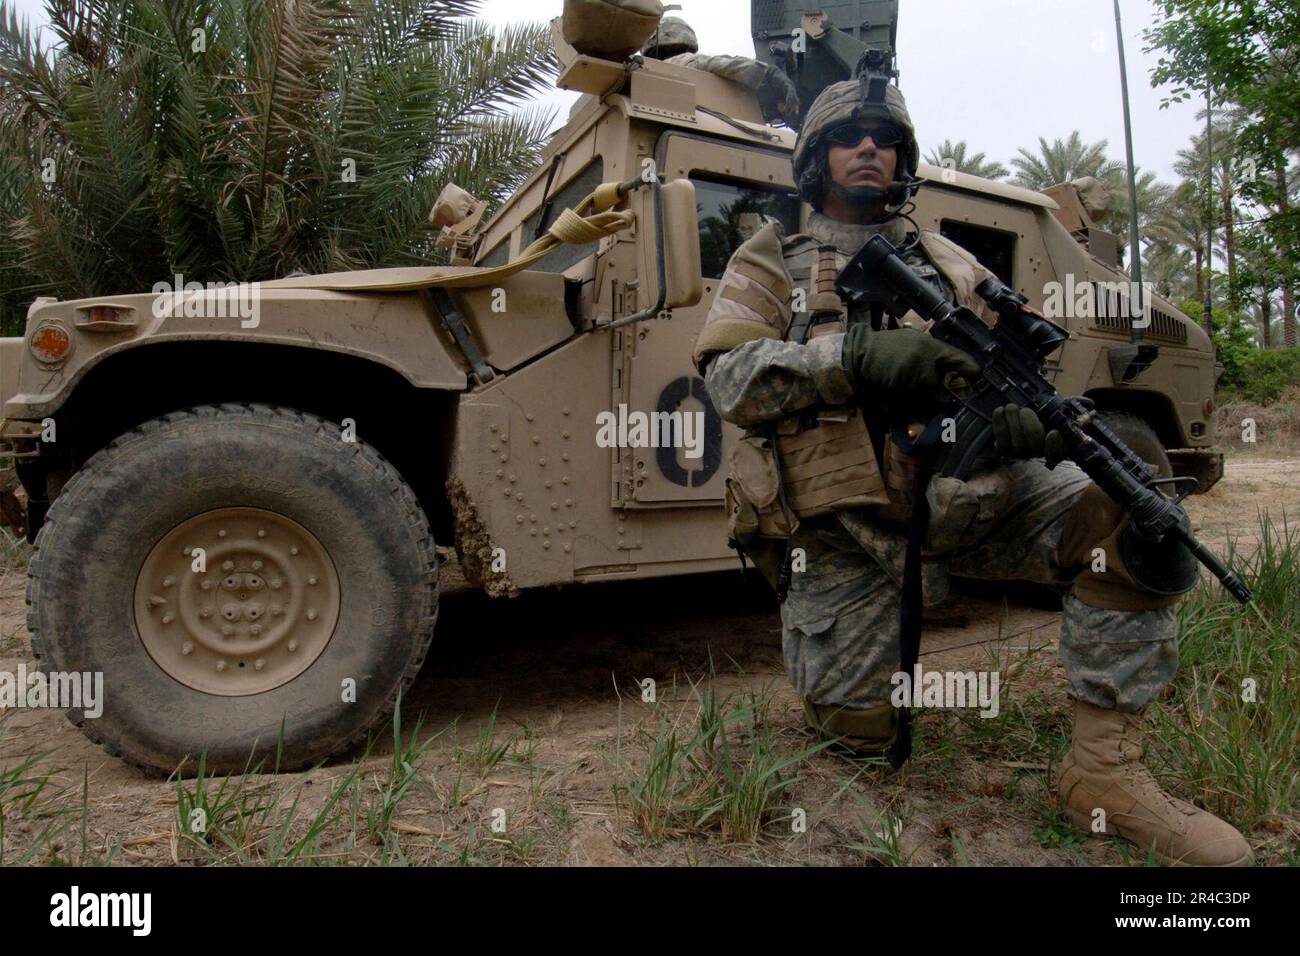 US Navy  U.S. Army Spc. stands perimeter security in front of an M1114 HMMWV (Humvee) near the town of Tarmiya, Iraq during counter-insurgency operations. Stock Photo